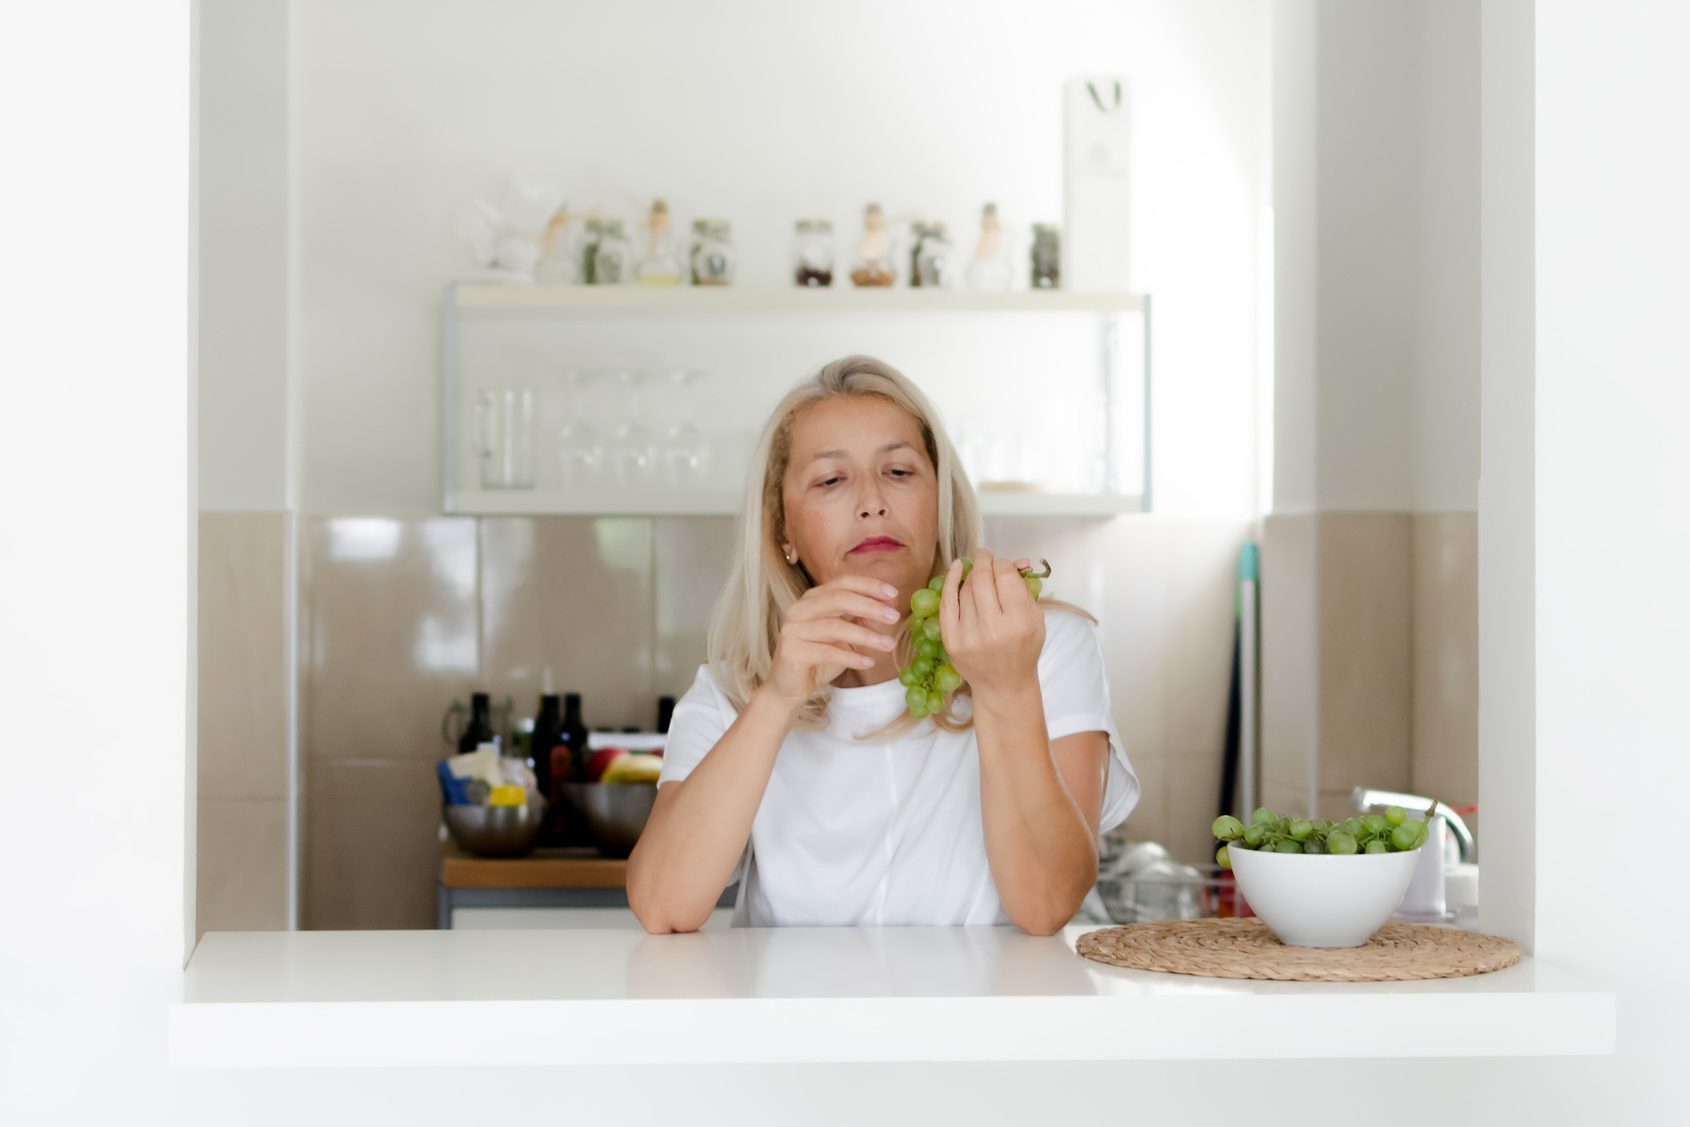 Woman standing in kitchen and eating grapes